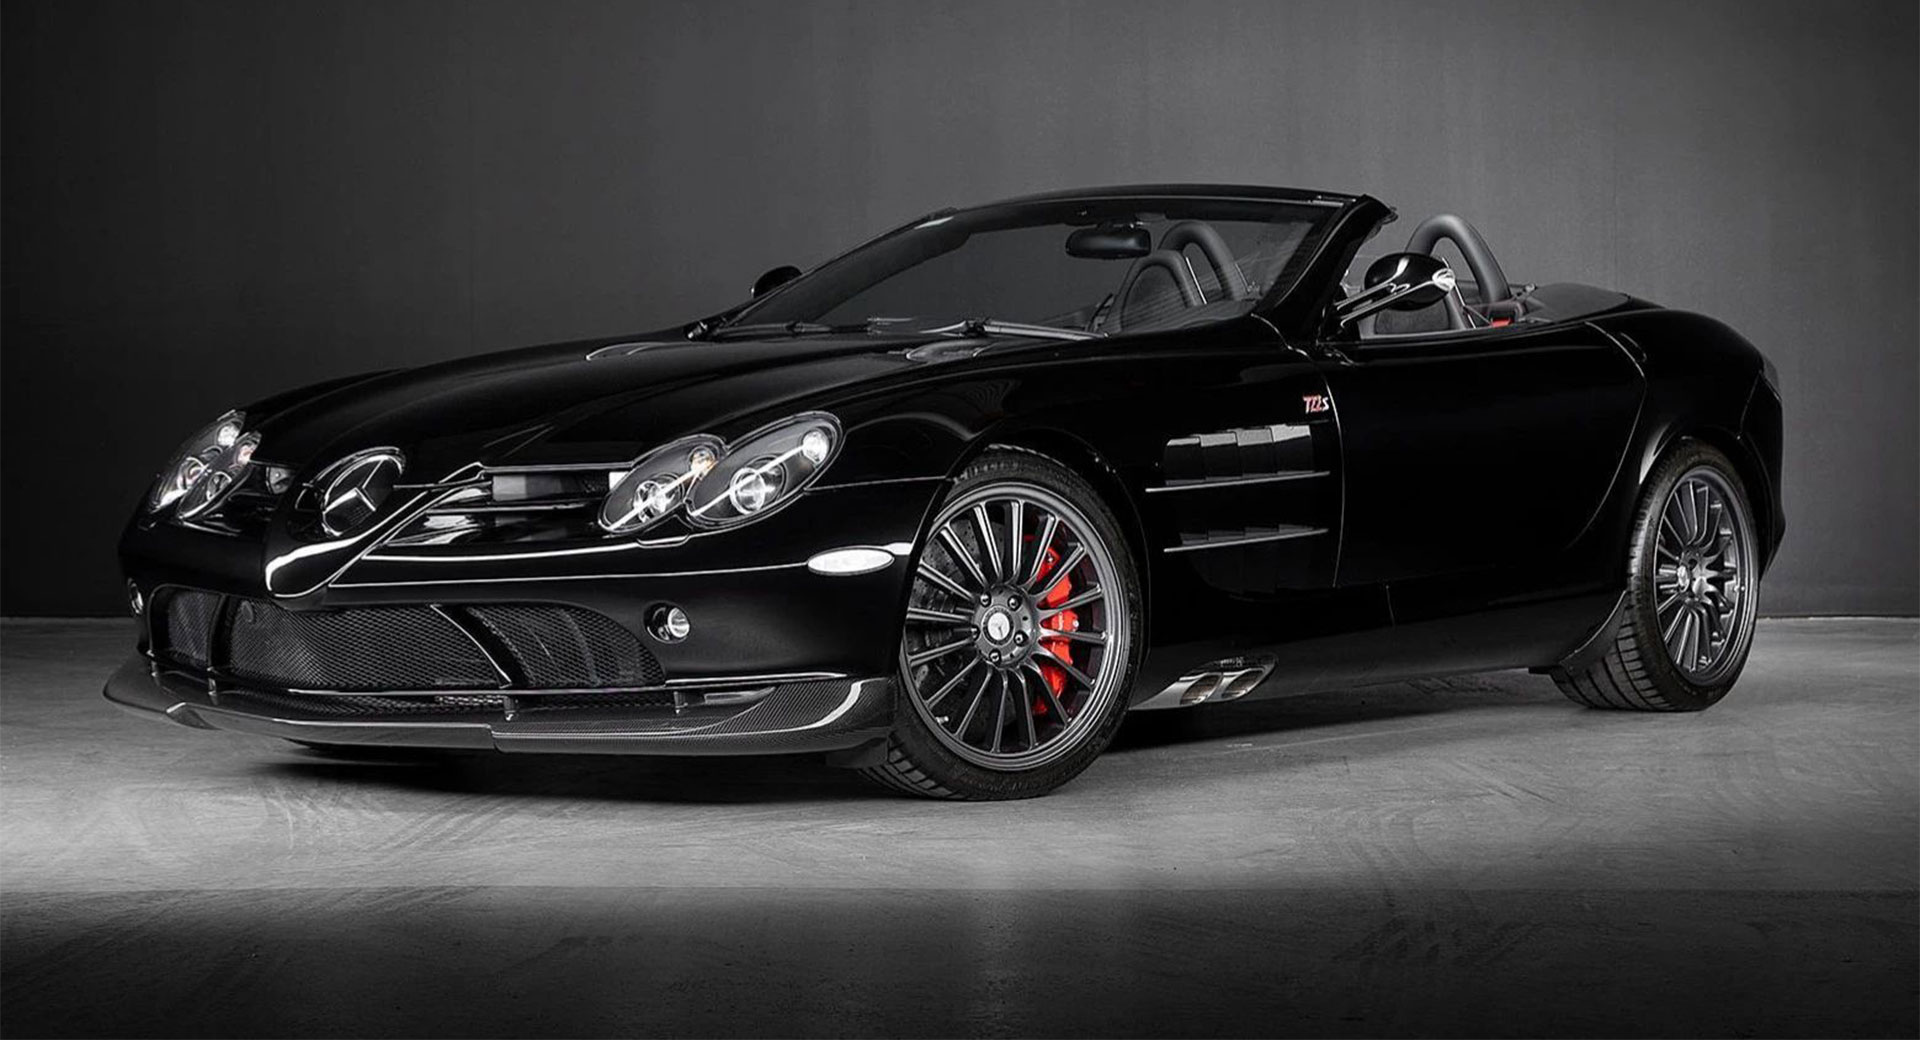 This MercedesBenz SLR McLaren Proves Just How Valuable The Car Is